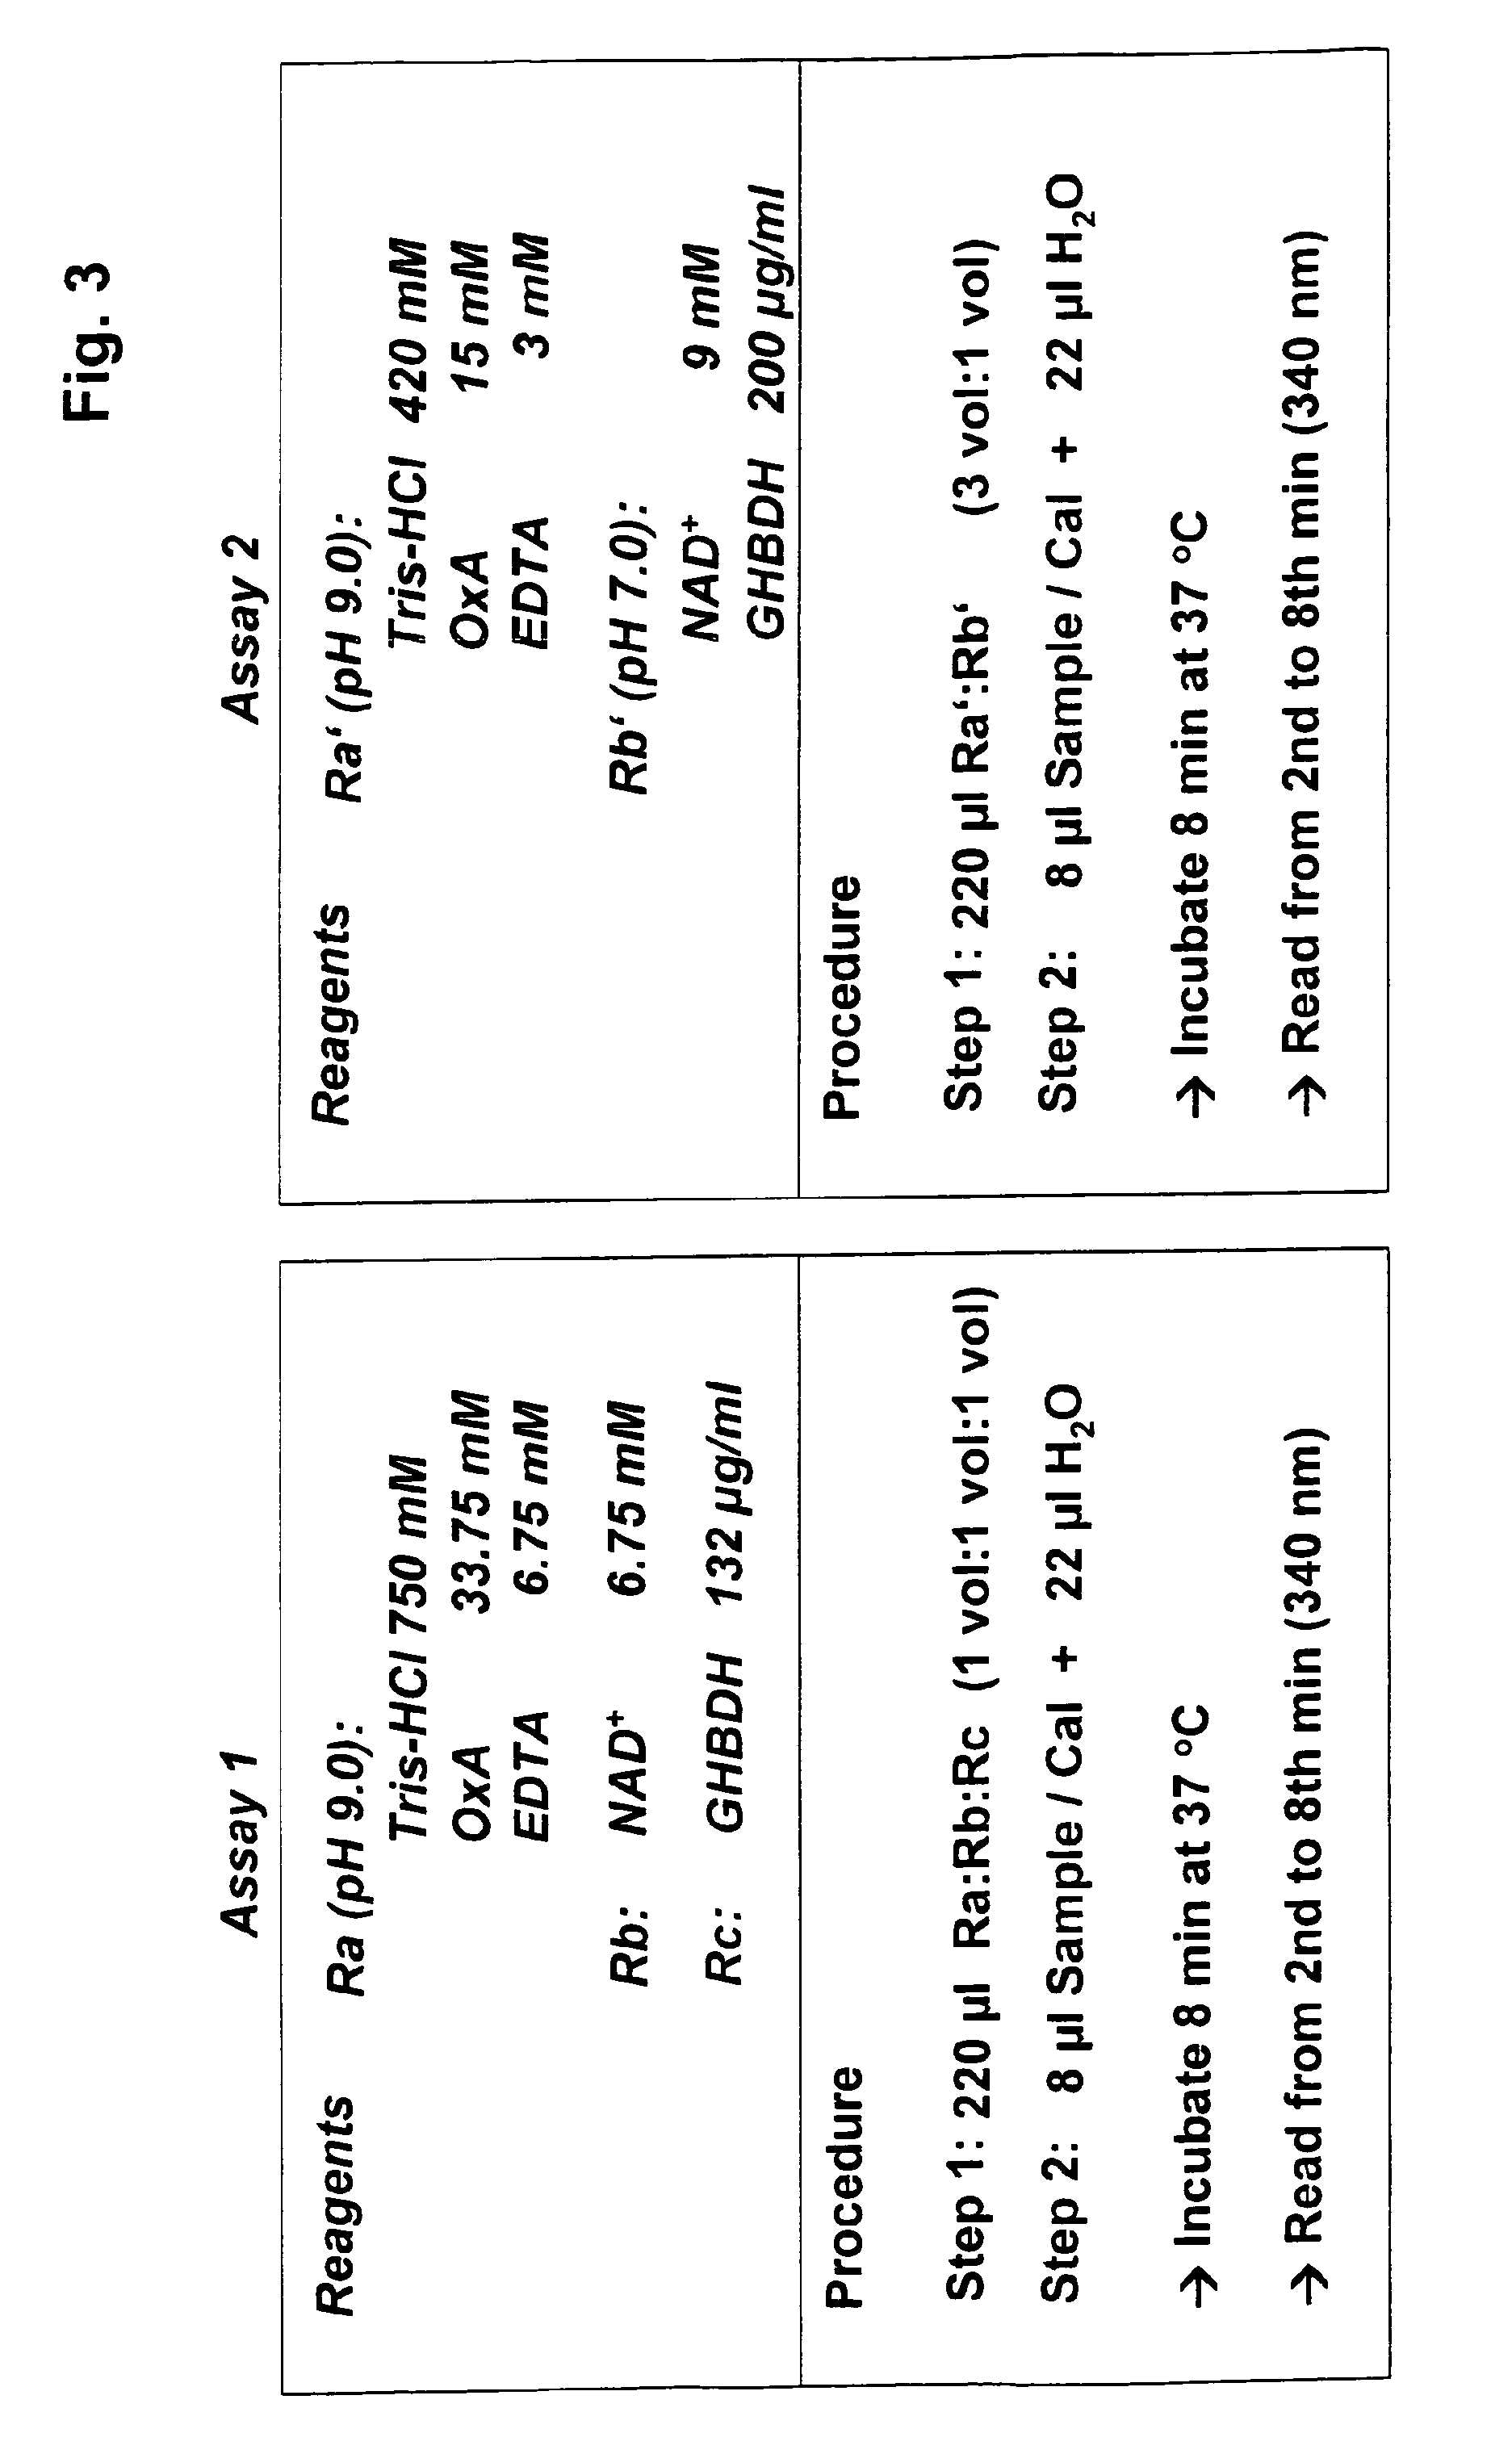 Methods for determining the concentration of gamma-hydroxy butyric acid (GHB) in a sample